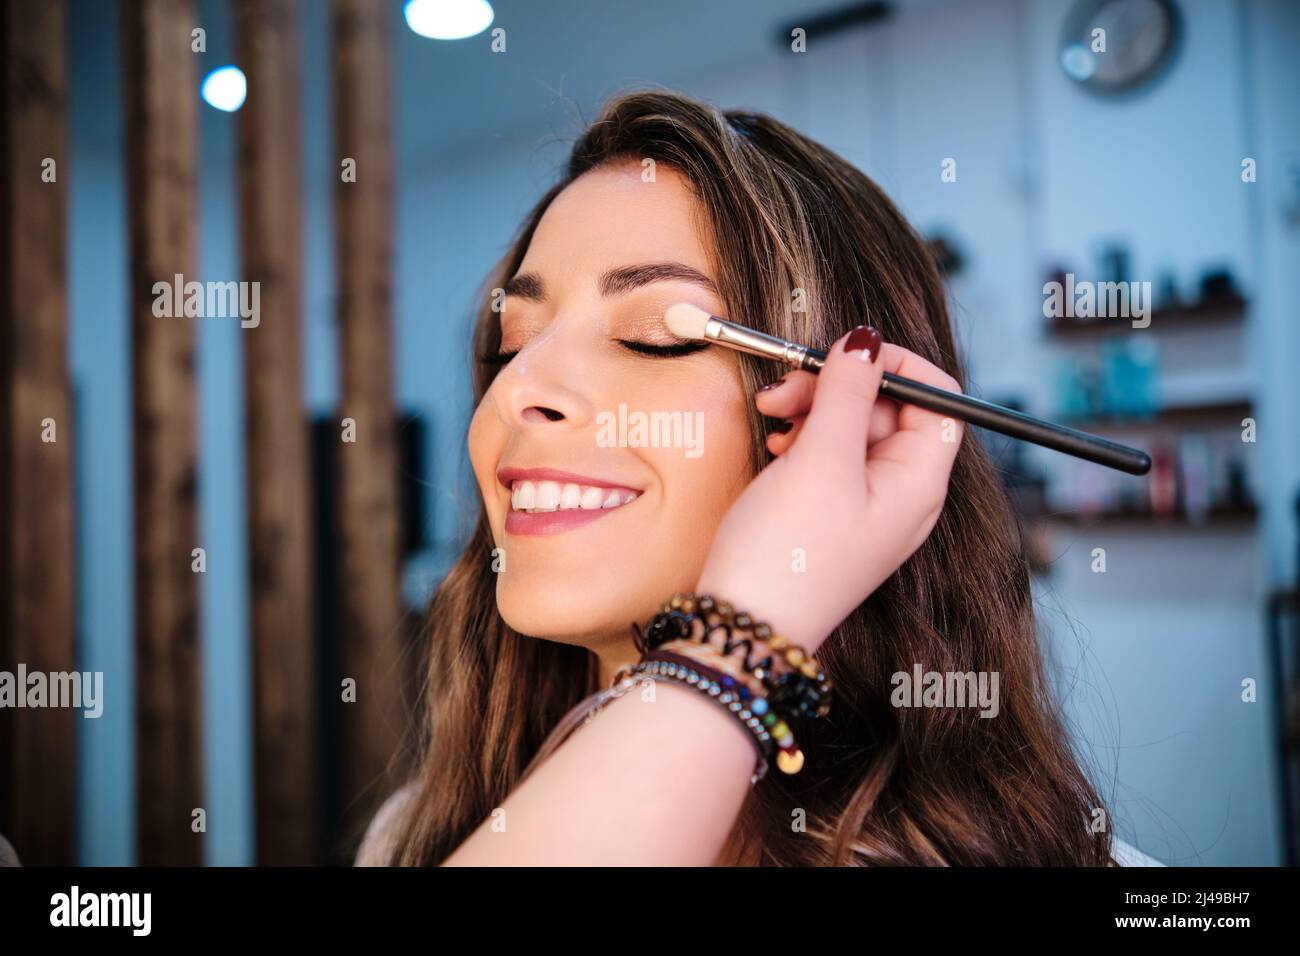 Woman smiling while getting her makeup done in the beauty salon. Stock Photo